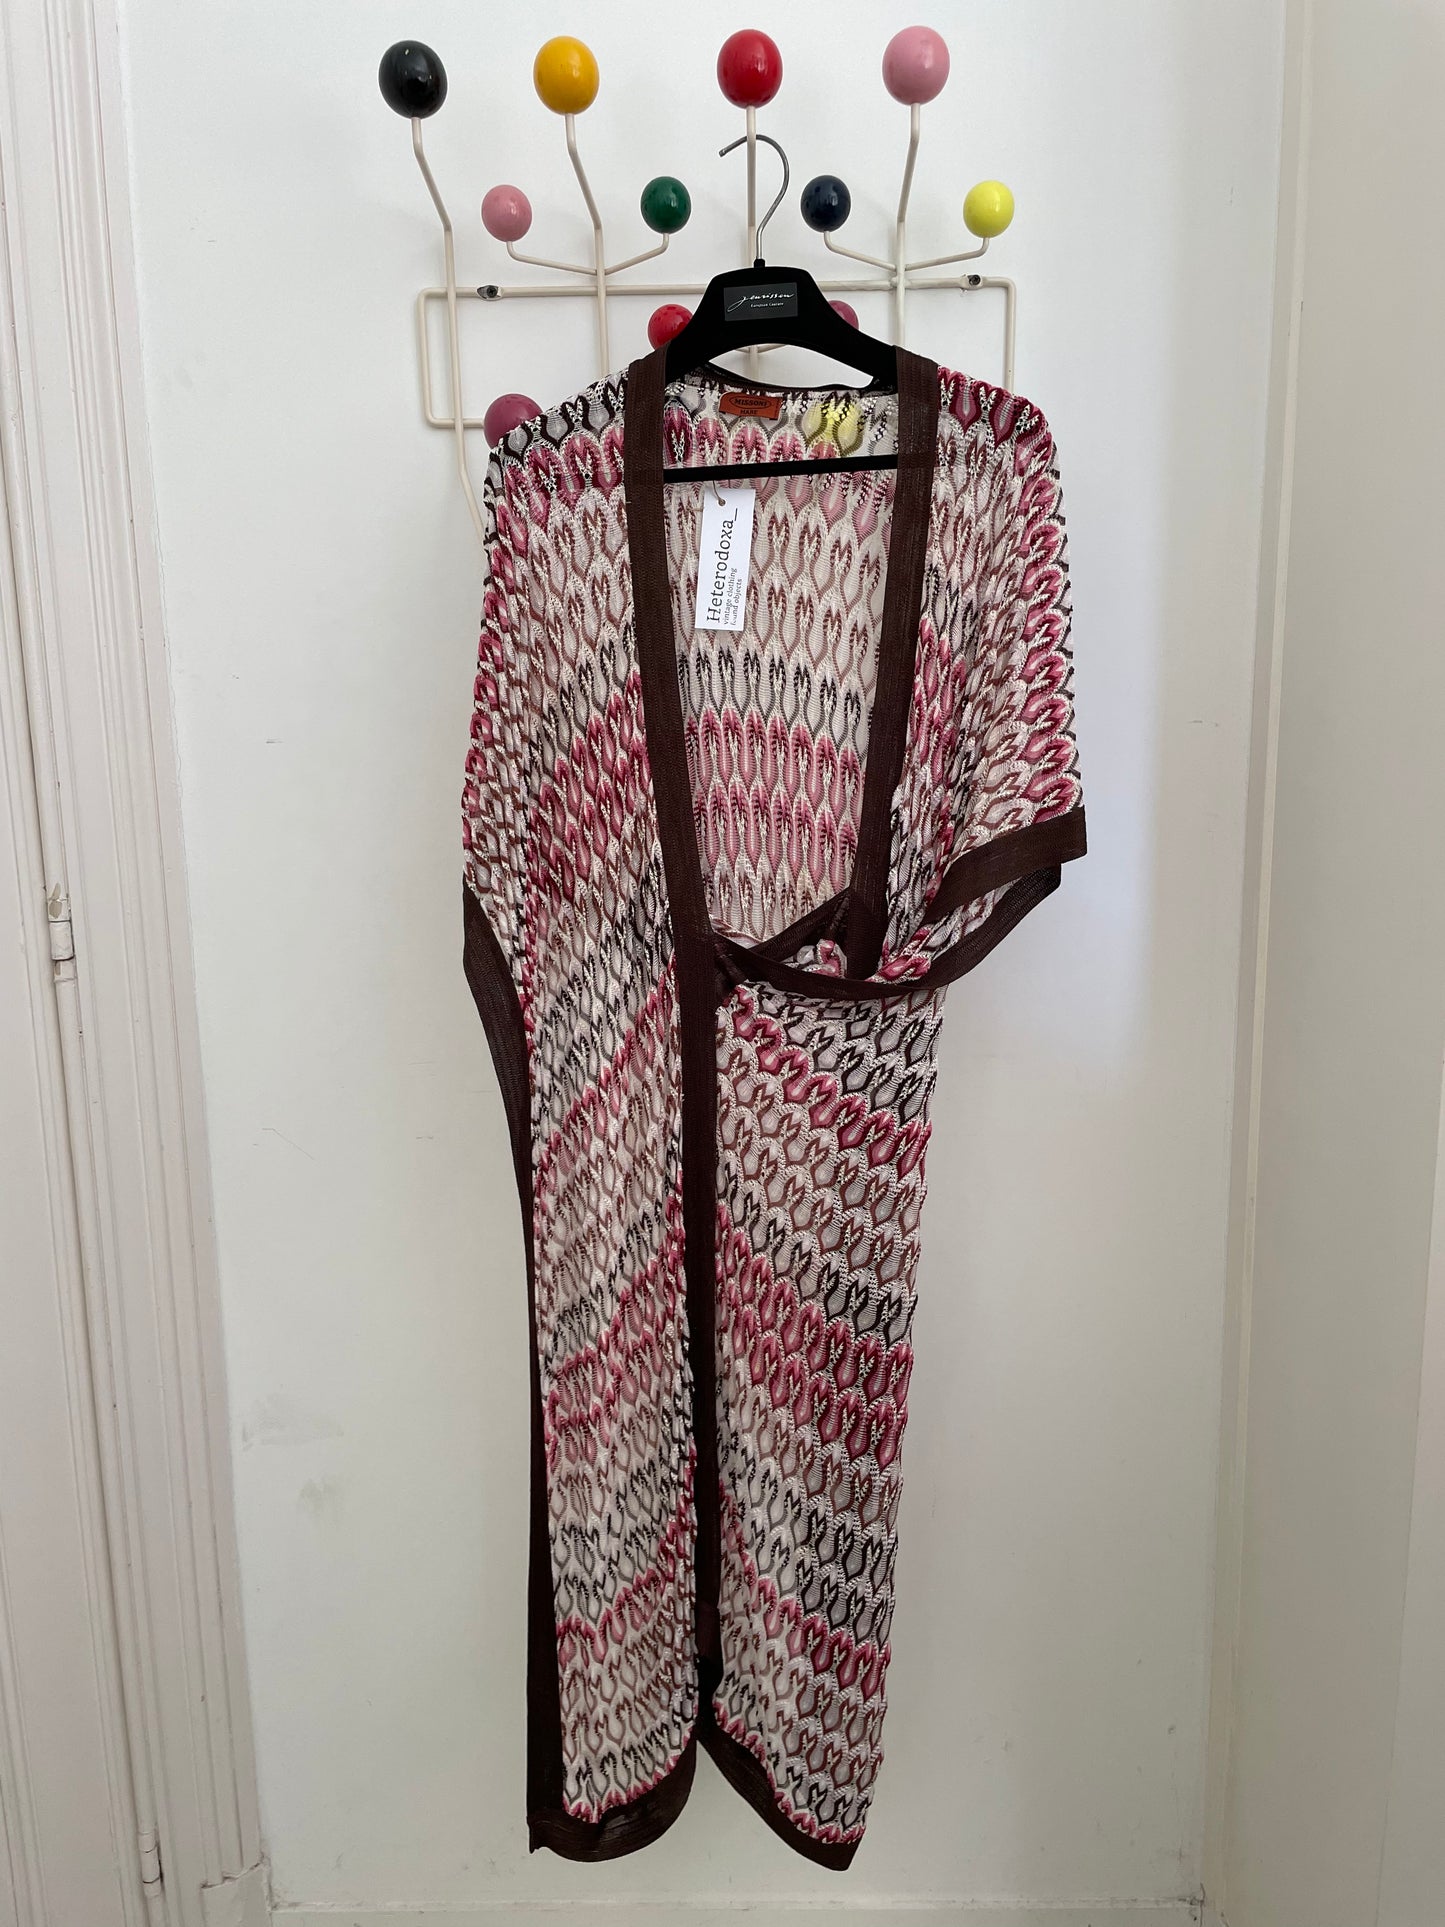 Missoni 90's knit wrap dress in shades of pink and brown